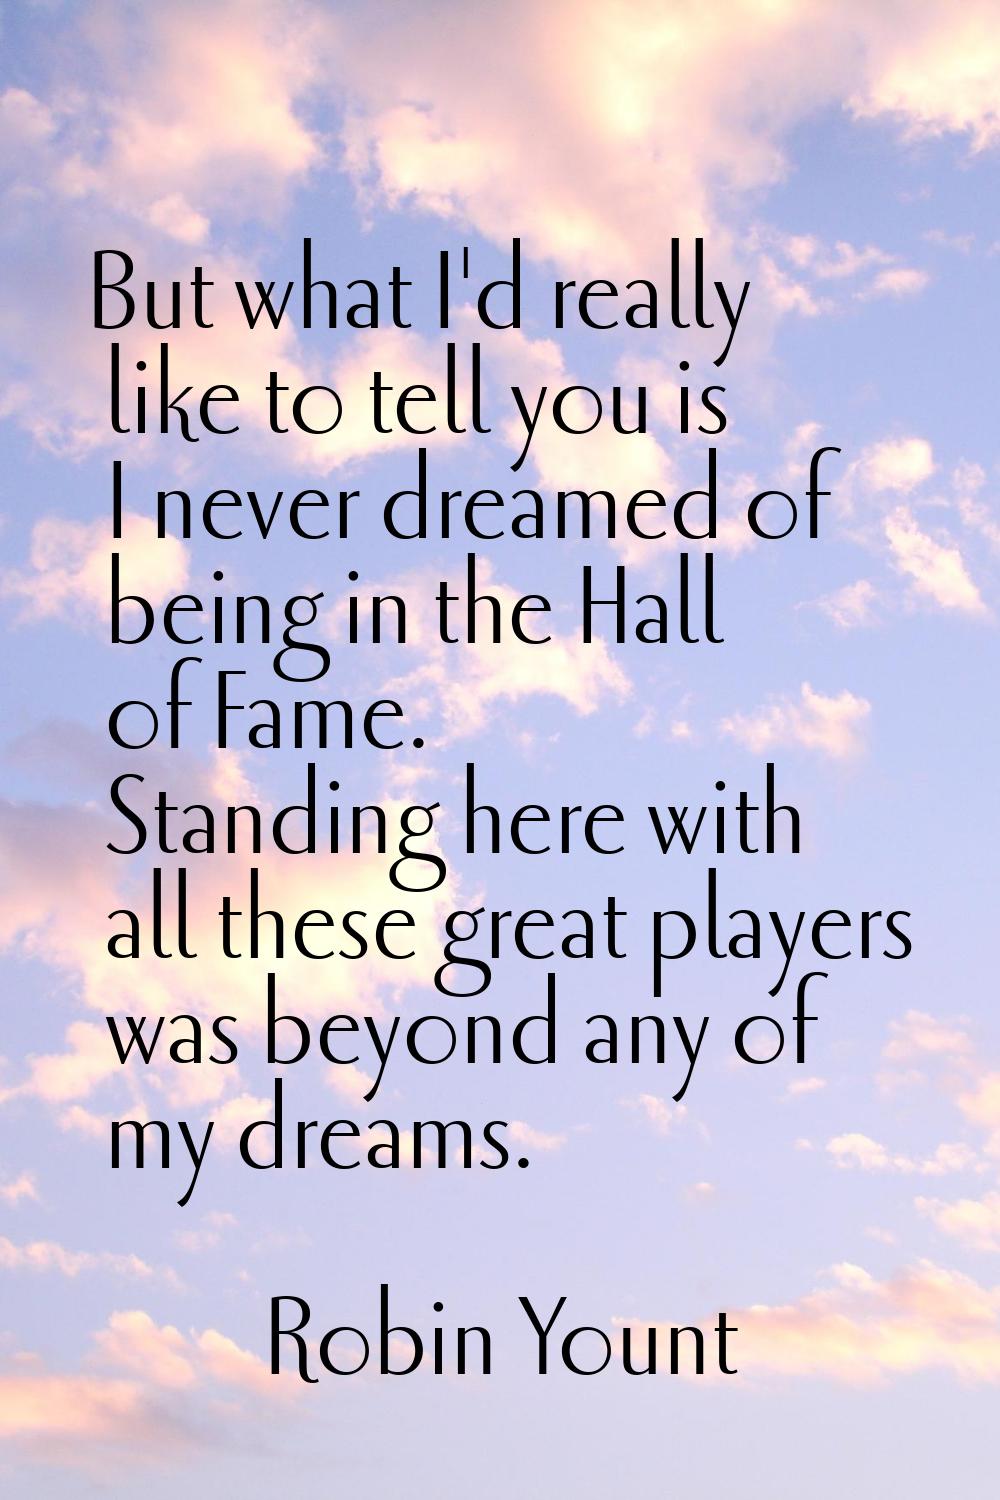 But what I'd really like to tell you is I never dreamed of being in the Hall of Fame. Standing here